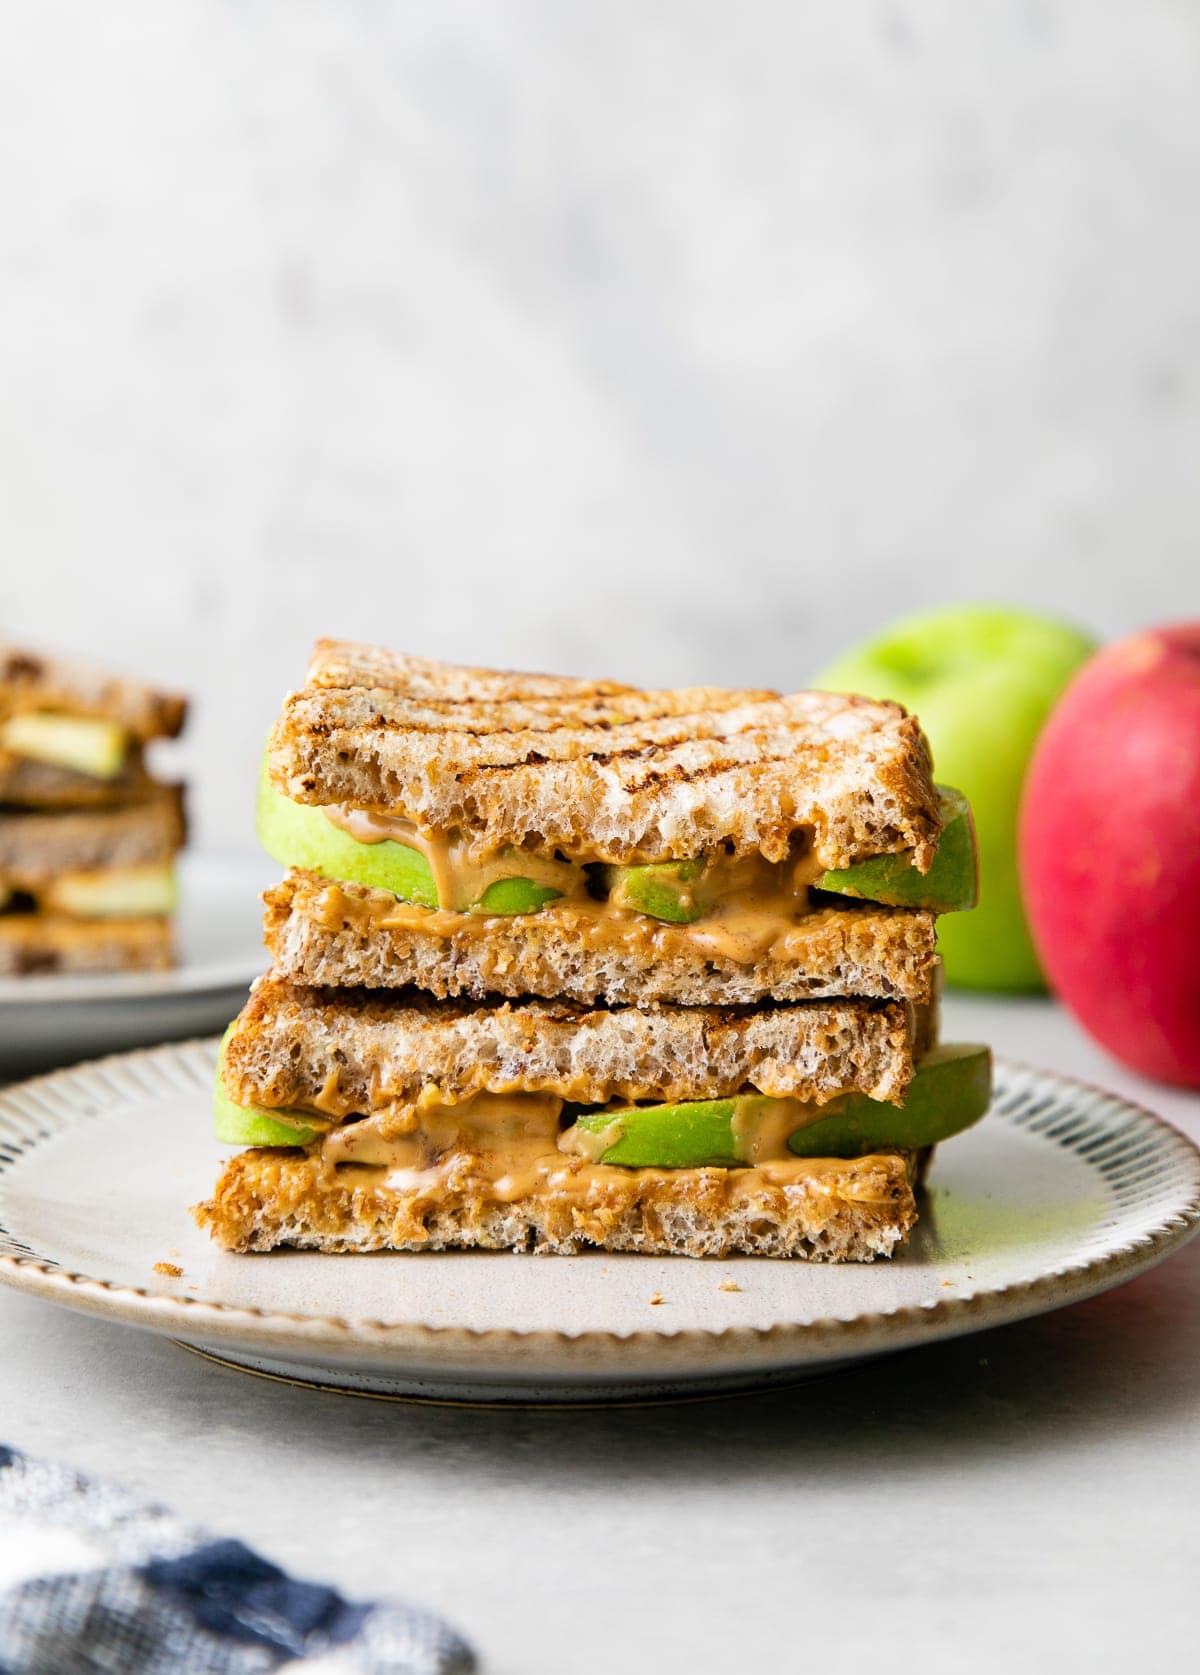 Grilled Peanut Butter Apple Sandwiches